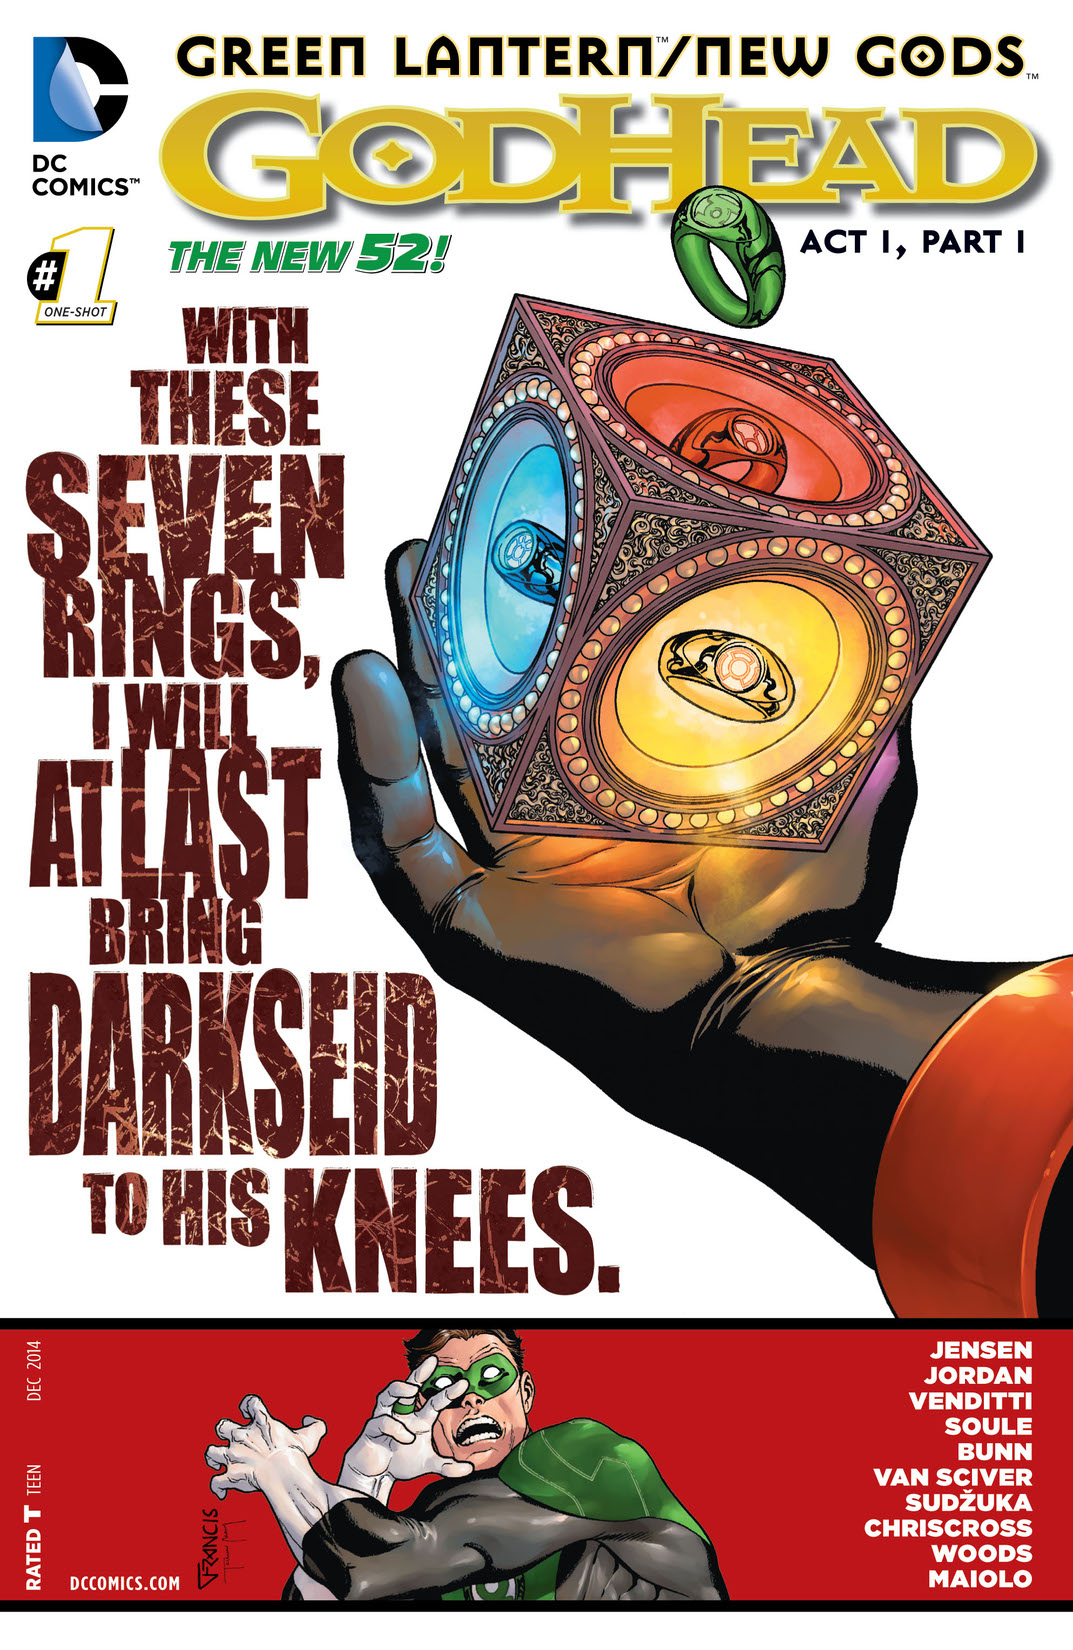 Green Lantern/New Gods: Godhead #1 preview images